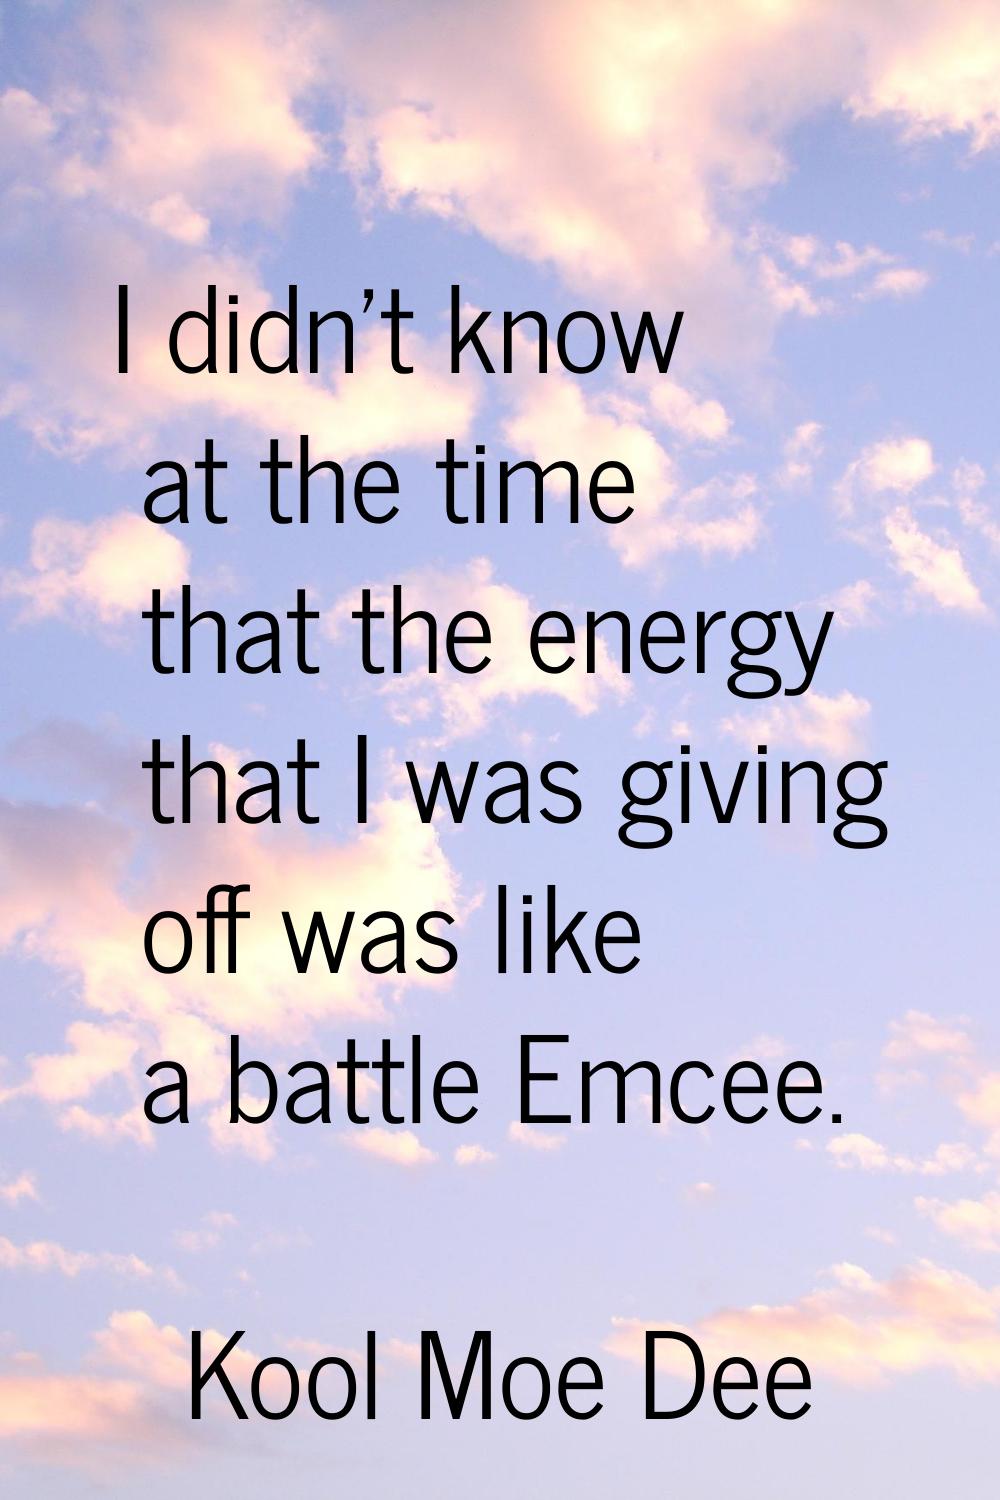 I didn't know at the time that the energy that I was giving off was like a battle Emcee.